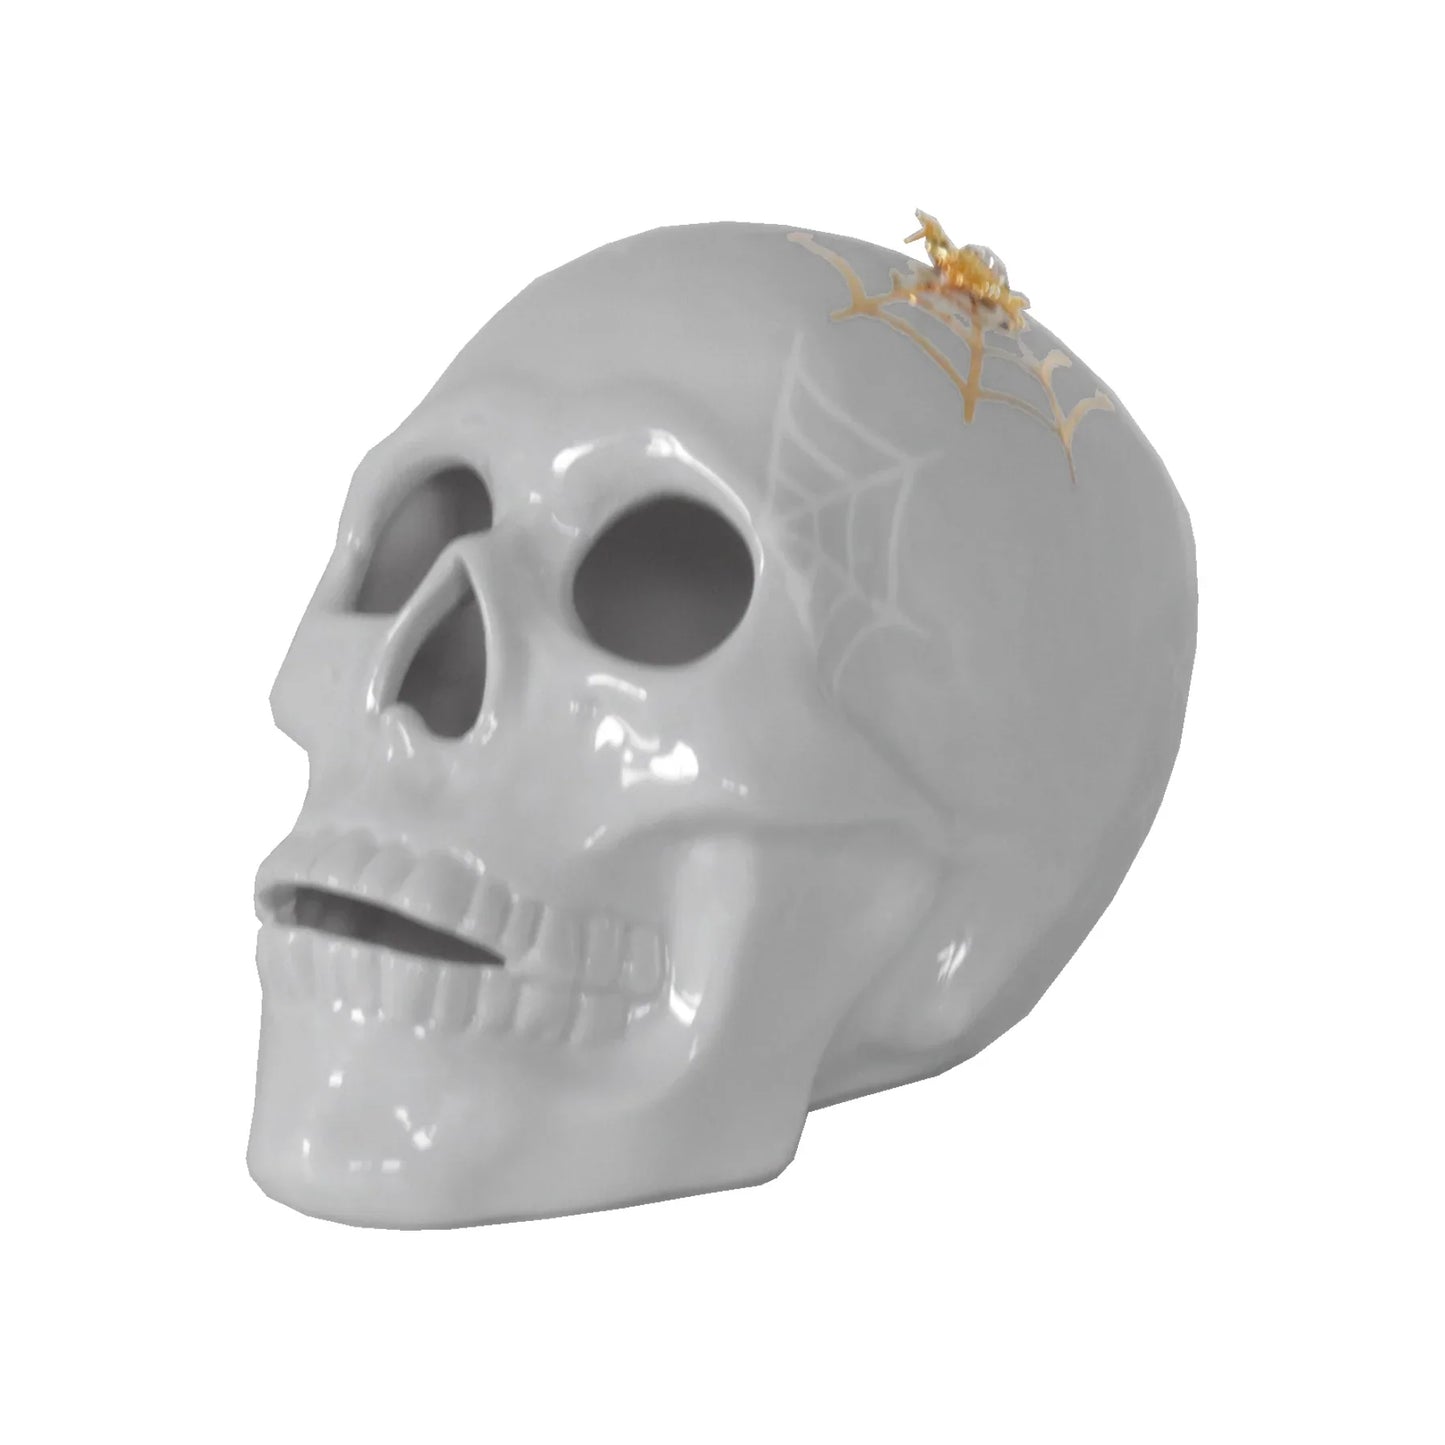 "Mr. Bones and Charlotte" Skull Decor with 22K Gold Accents- Light Gray | Wholesale